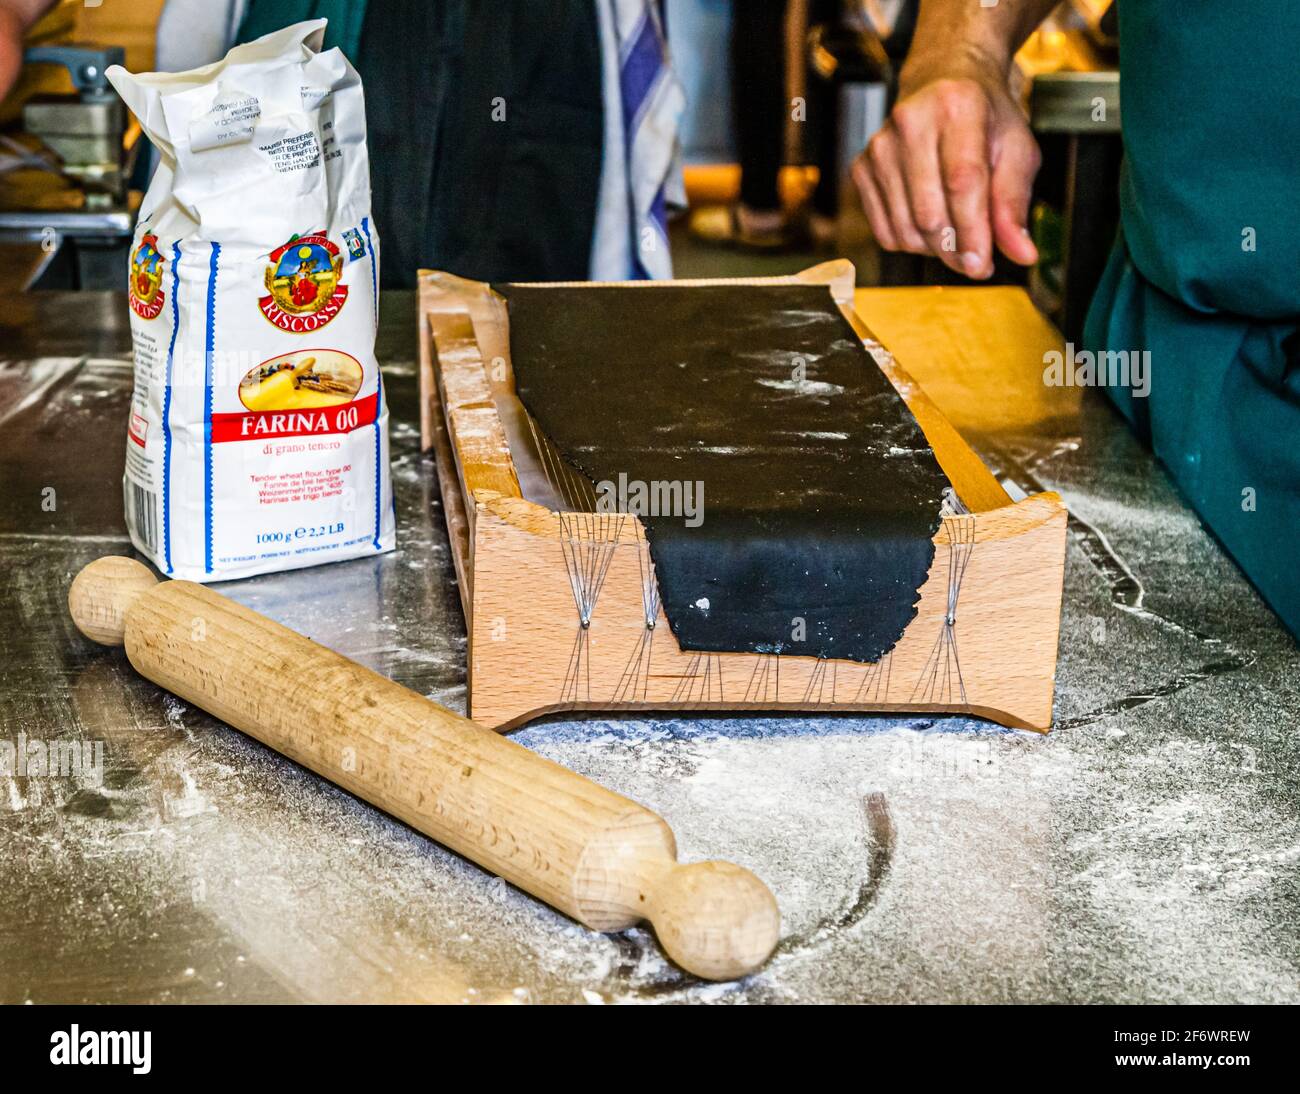 The carraturo in action and the rolling pin is already ready and fulfills its very own purpose! Stock Photo